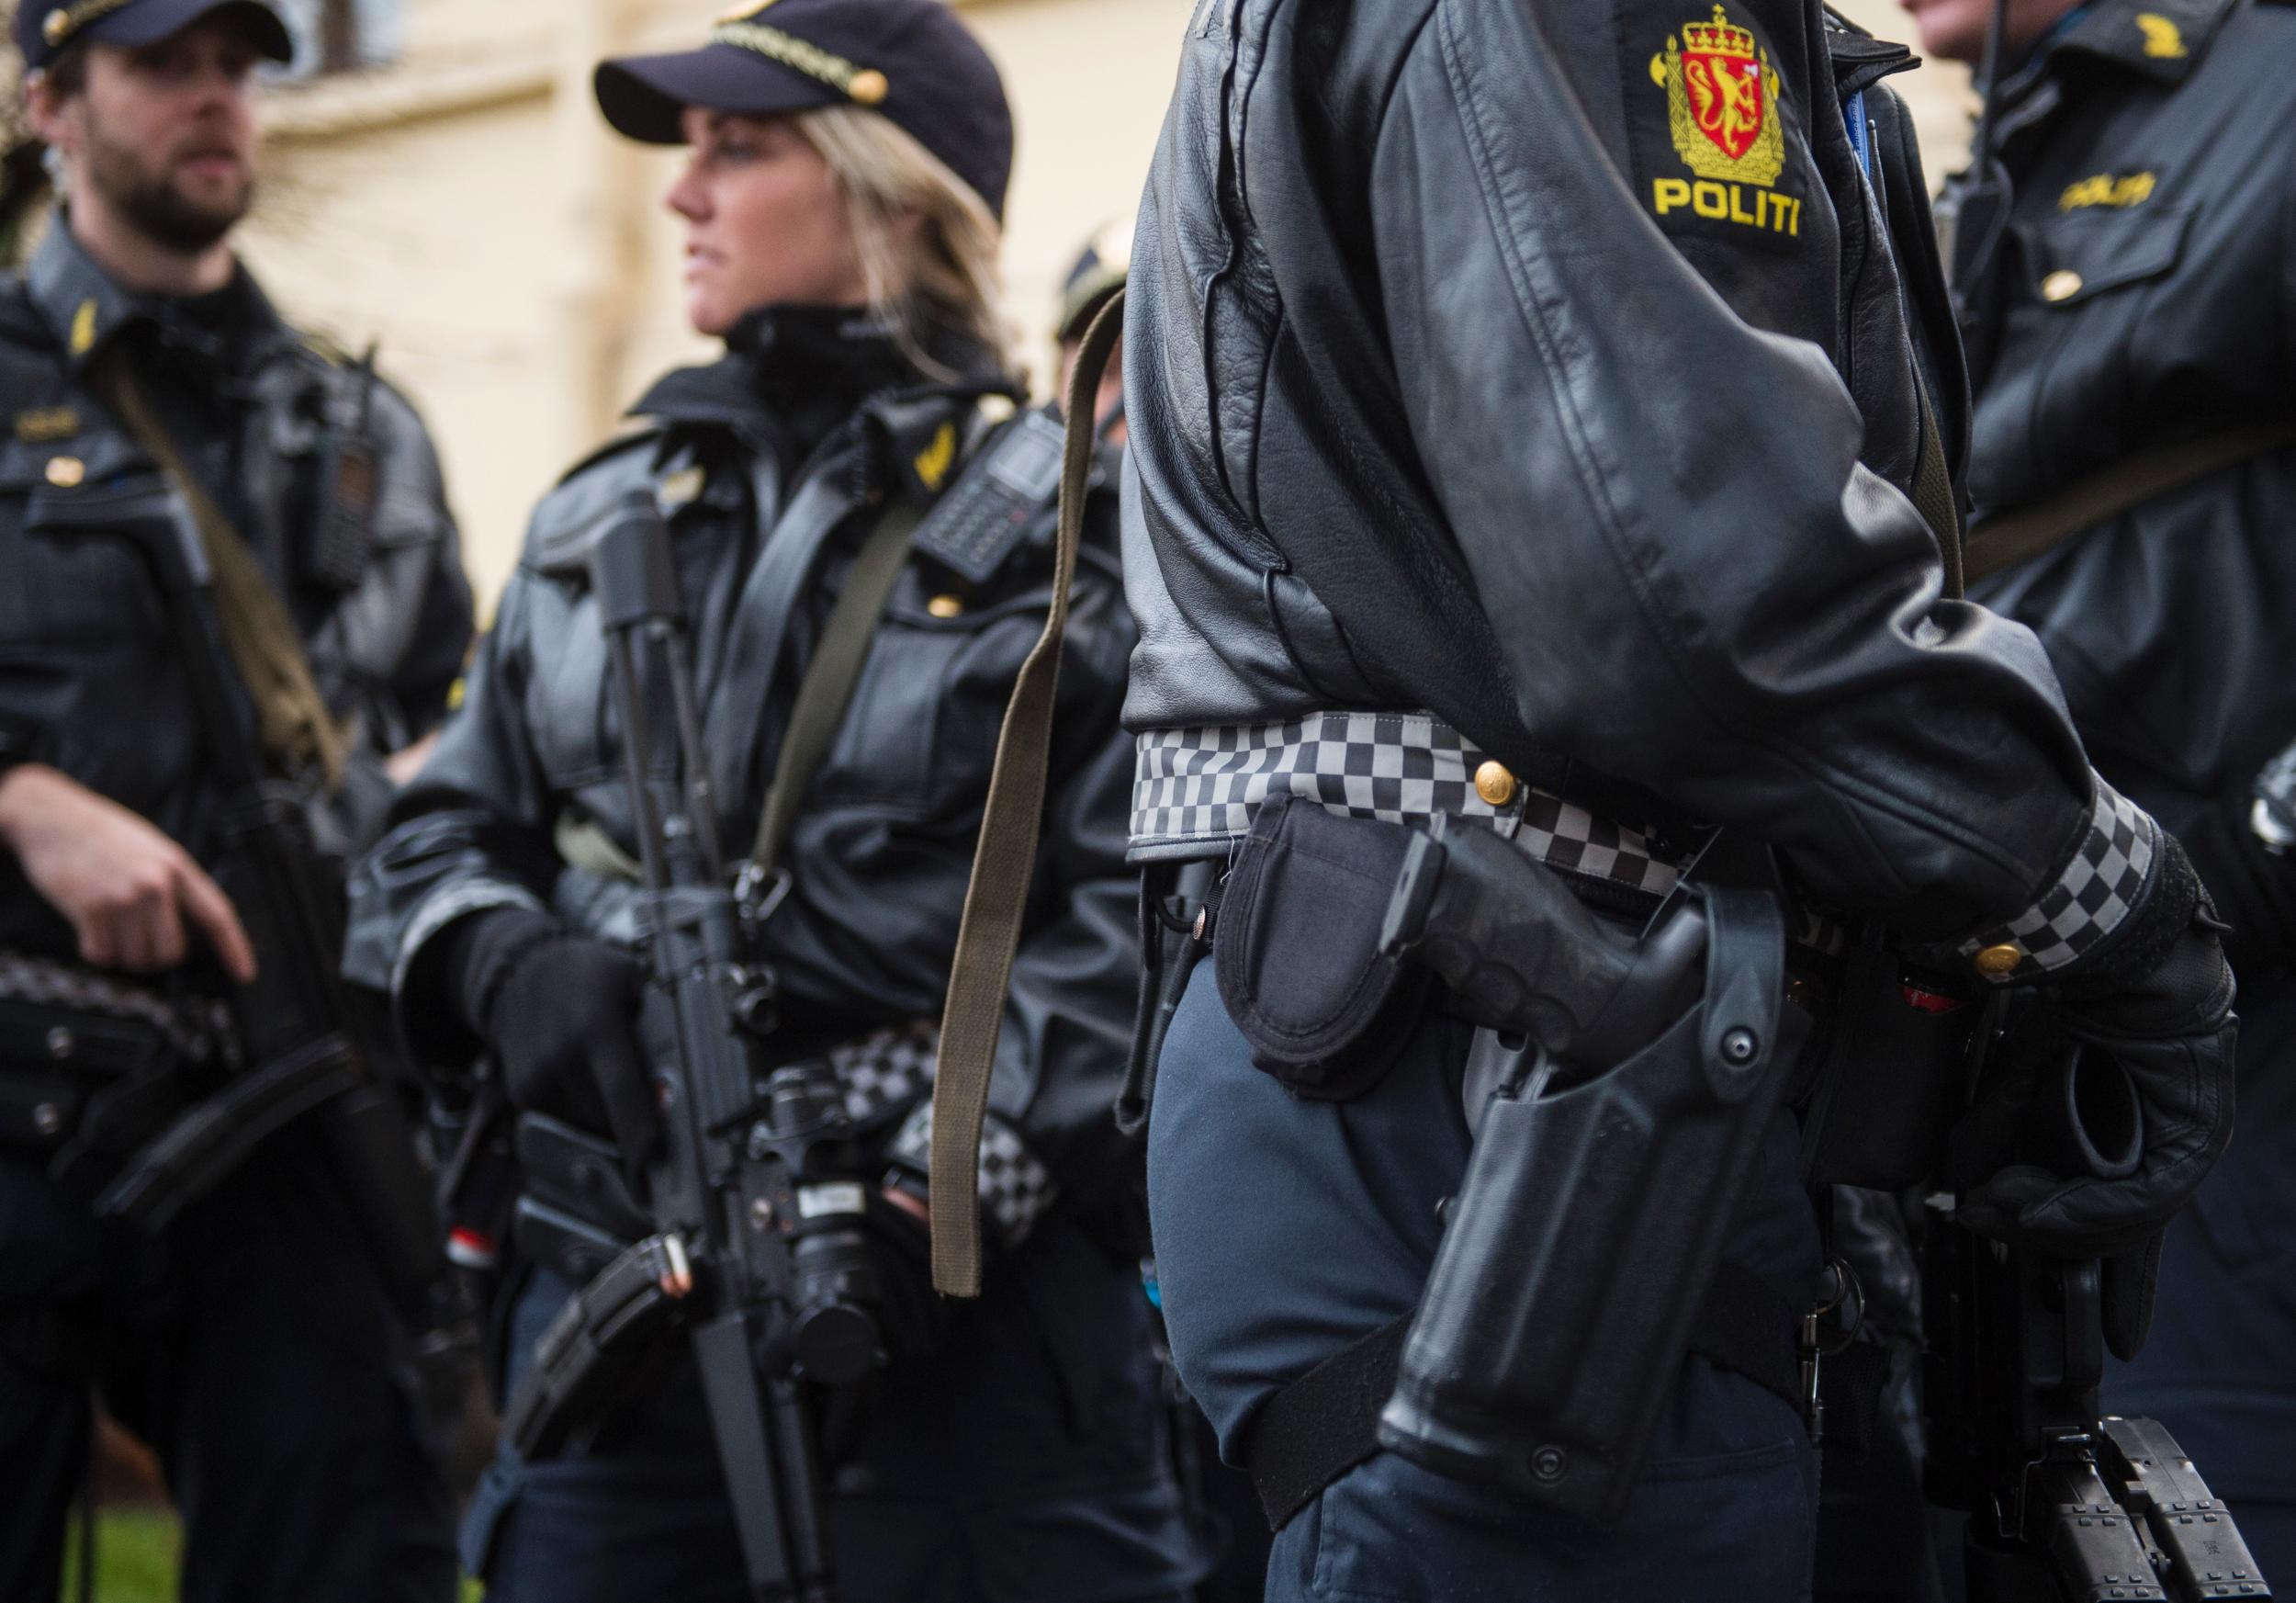 Norway police have been allowed to carry firearms since 2014